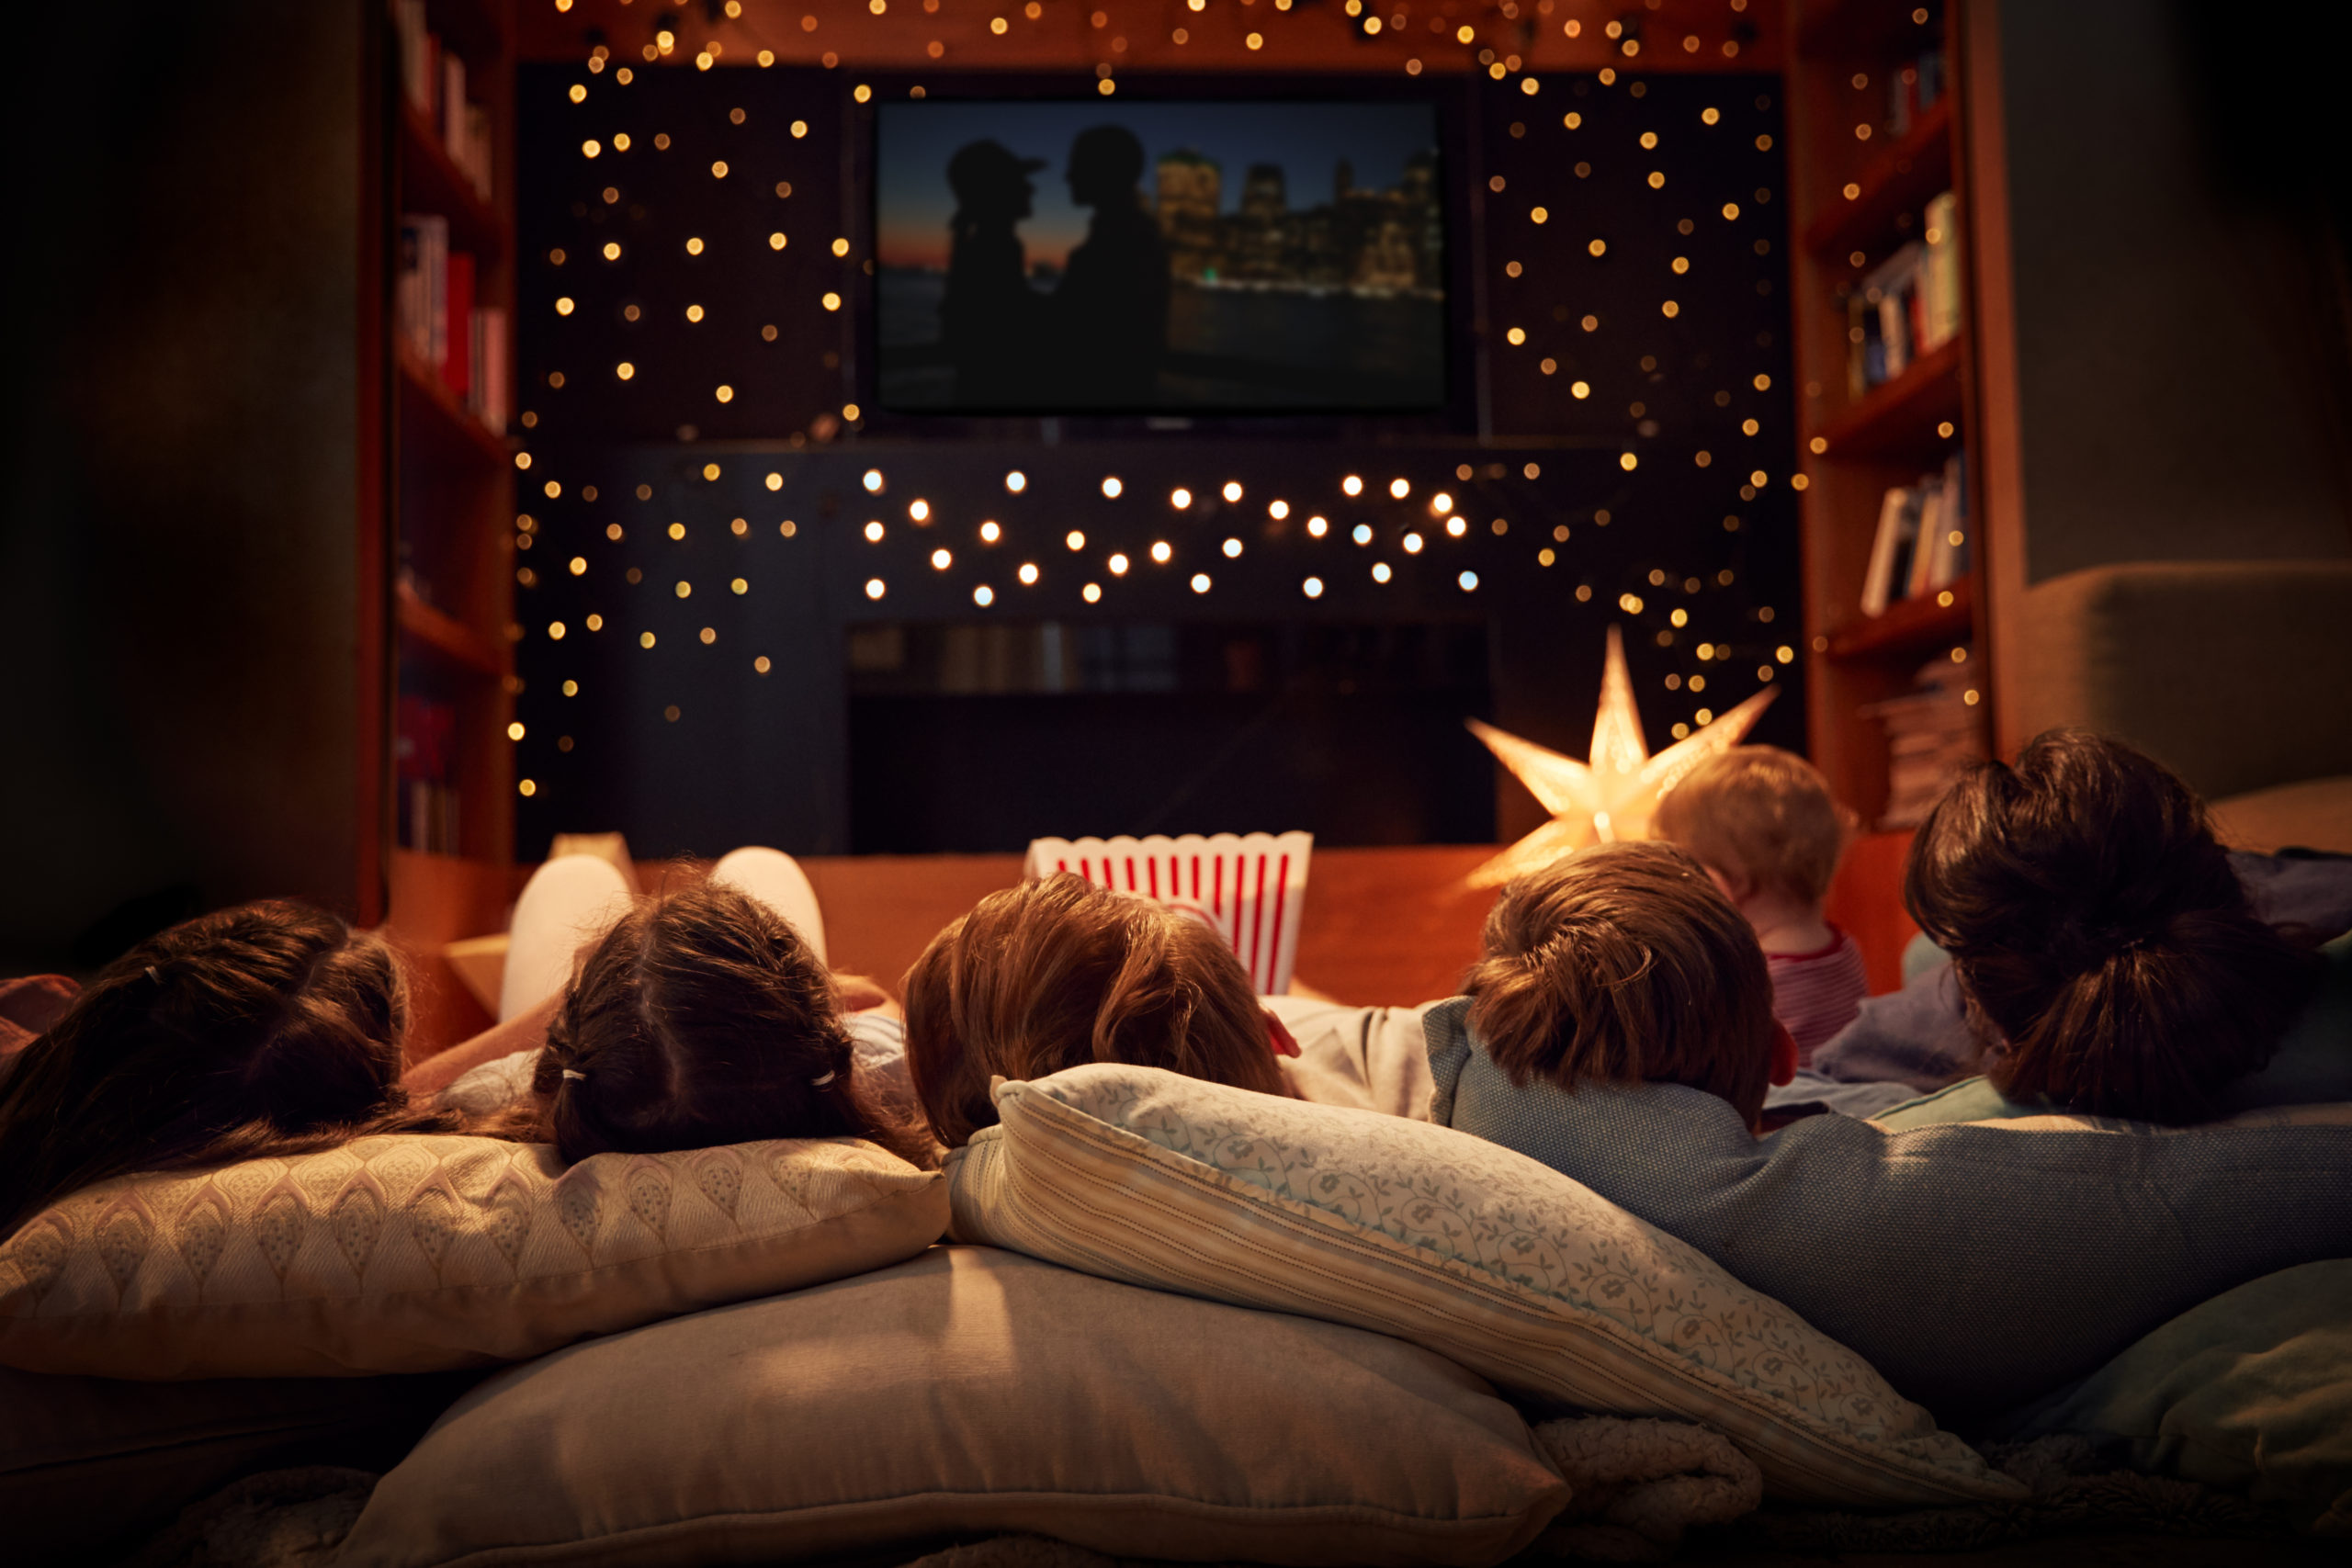 10 Ways to Have the Best Family Movie Night (with unique snack ideas!)